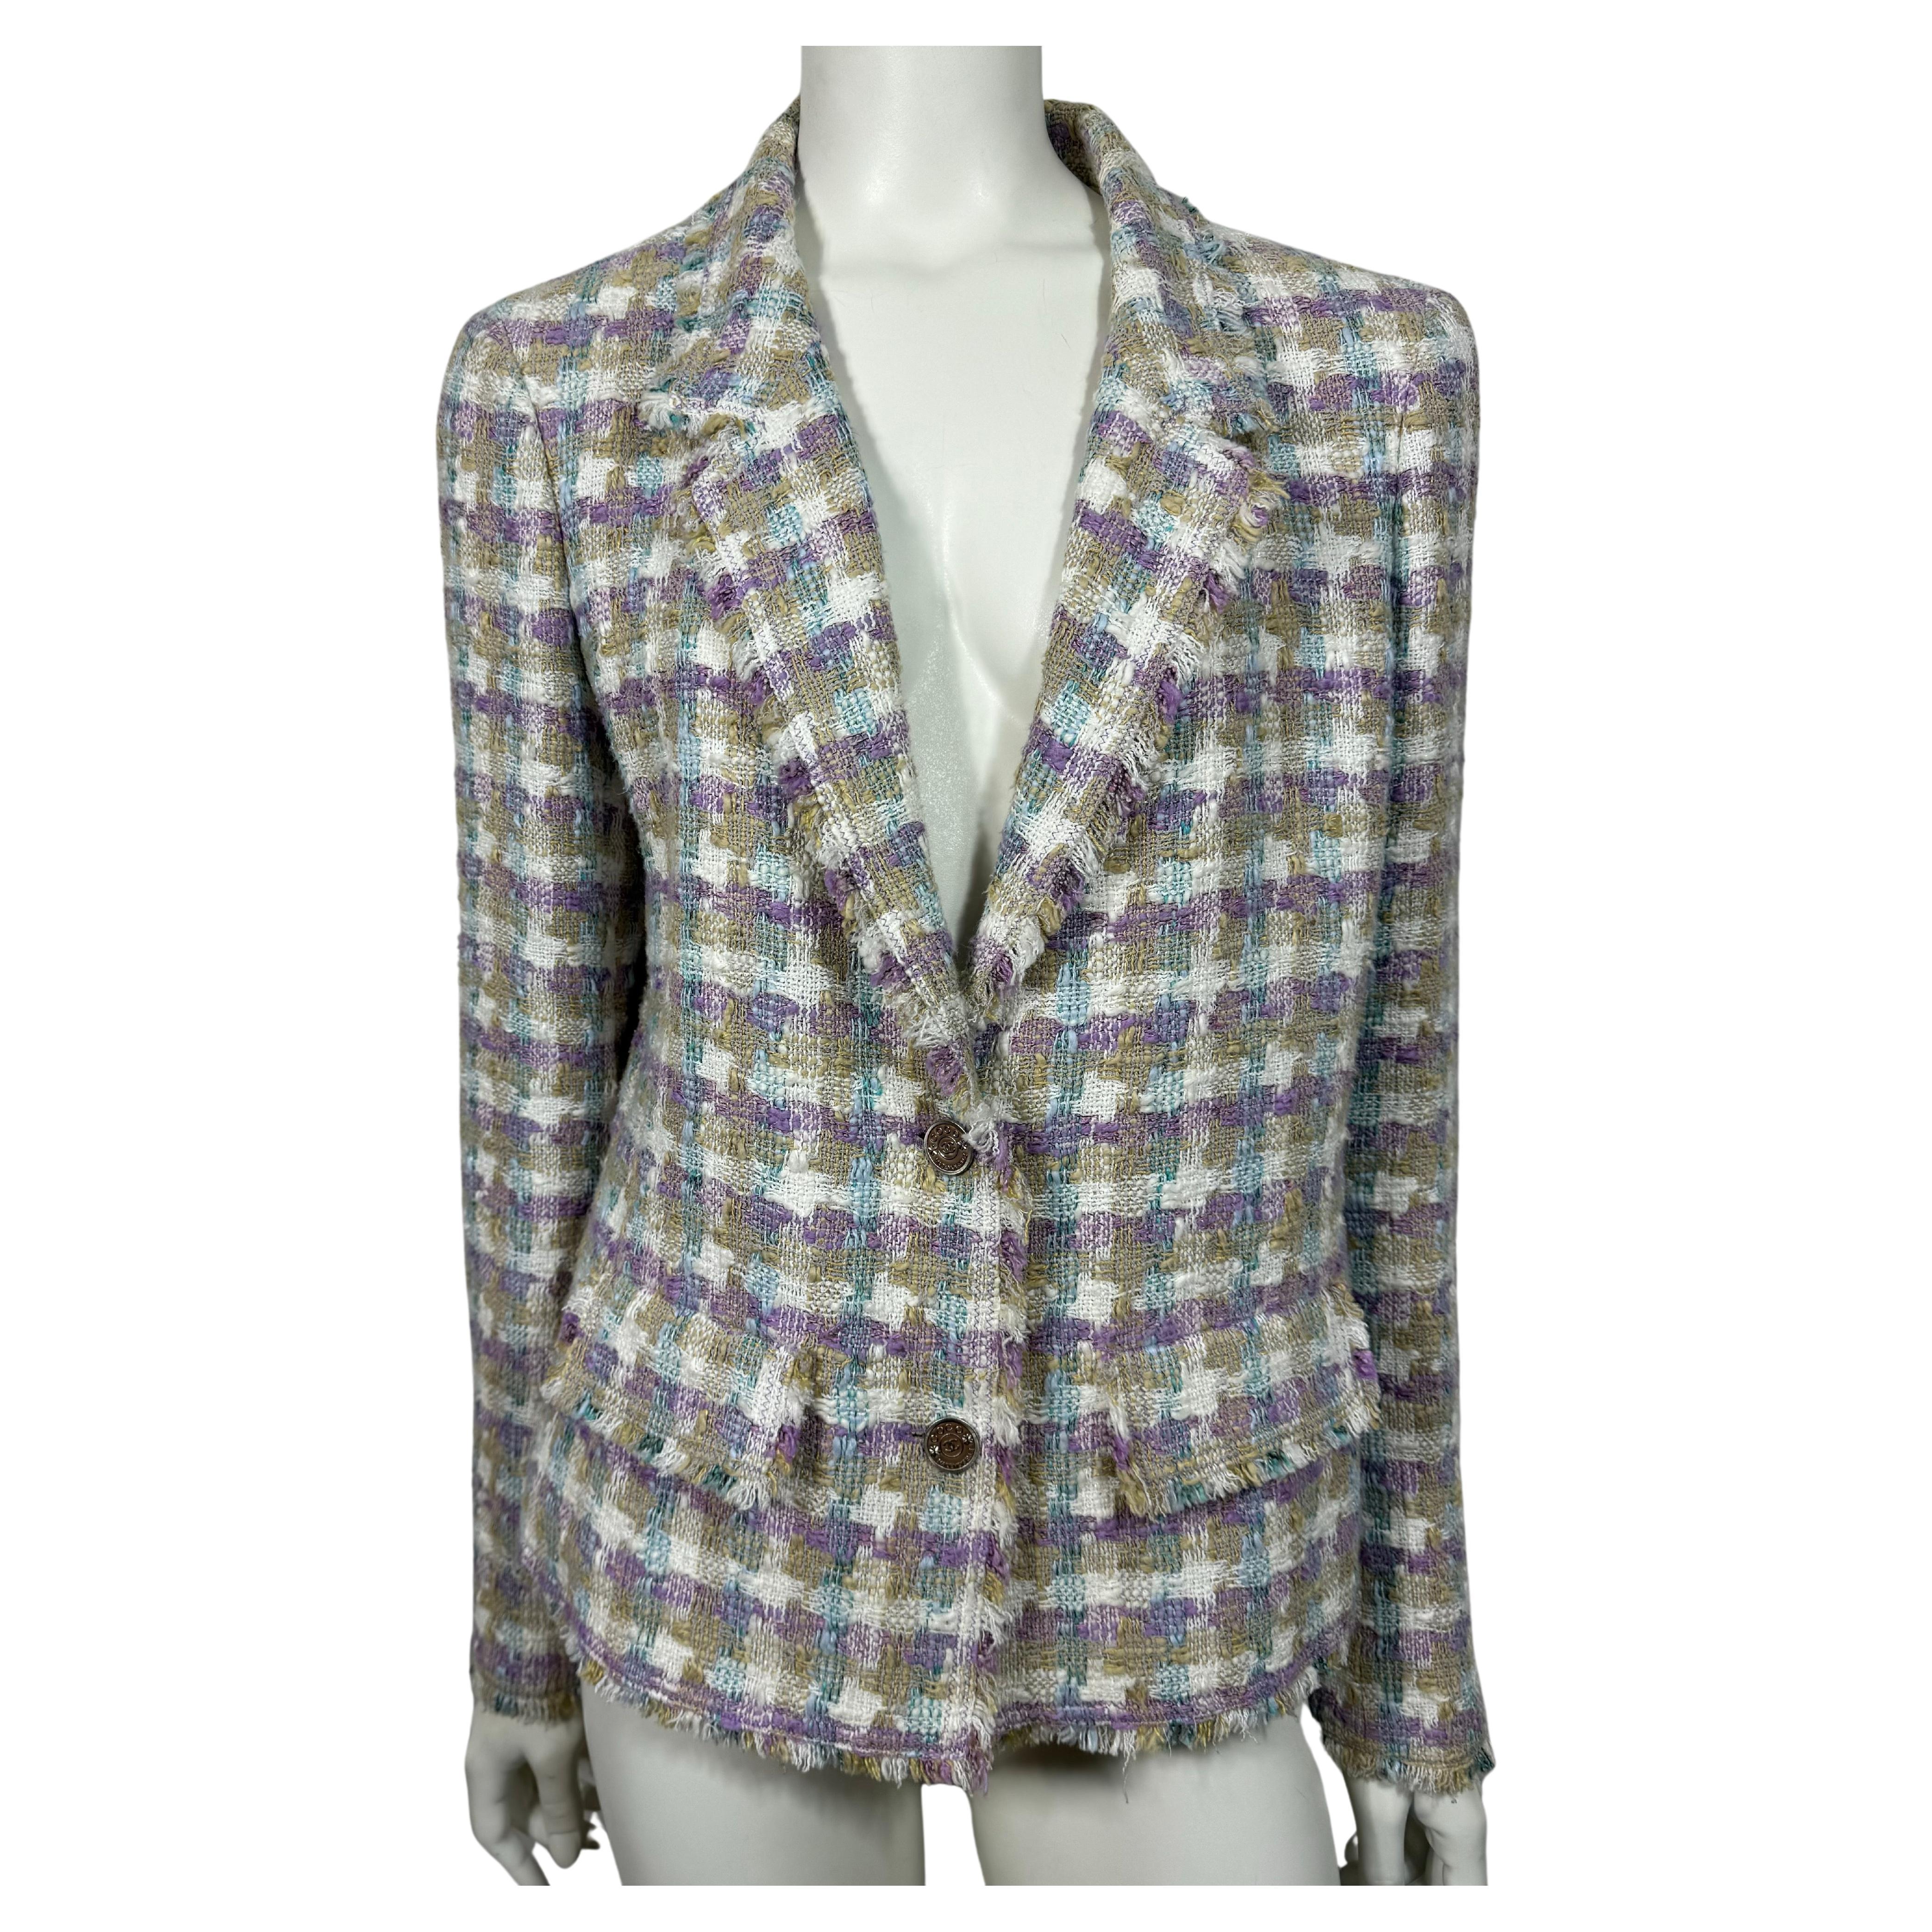 Chanel Spring 2005 Multi Pastel Tweed Single Breasted Jacket-Size 44 For Sale